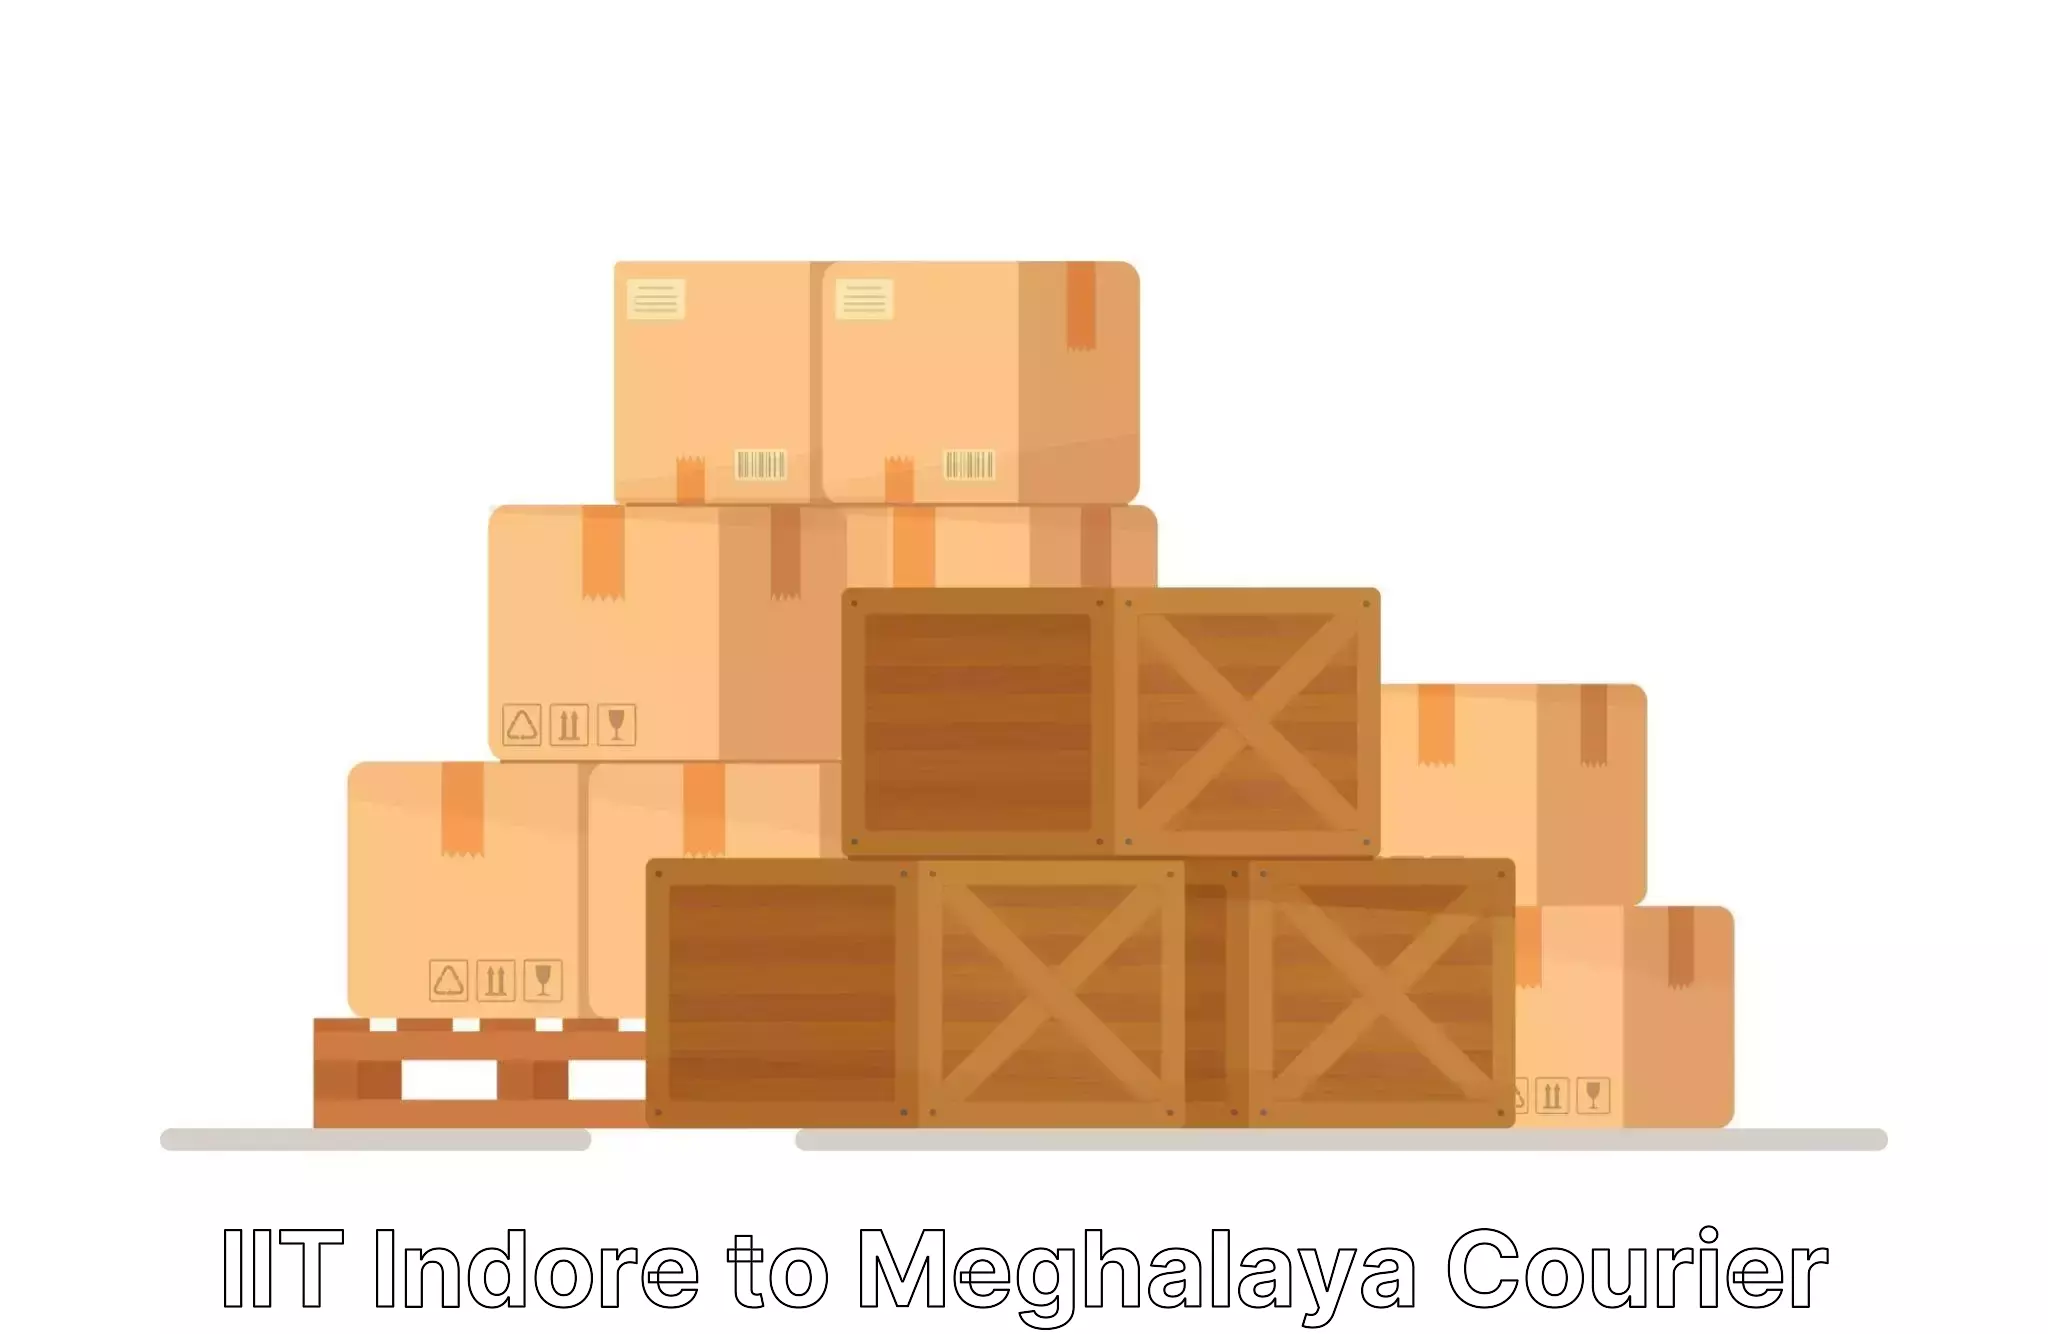 Customized relocation services IIT Indore to NIT Meghalaya